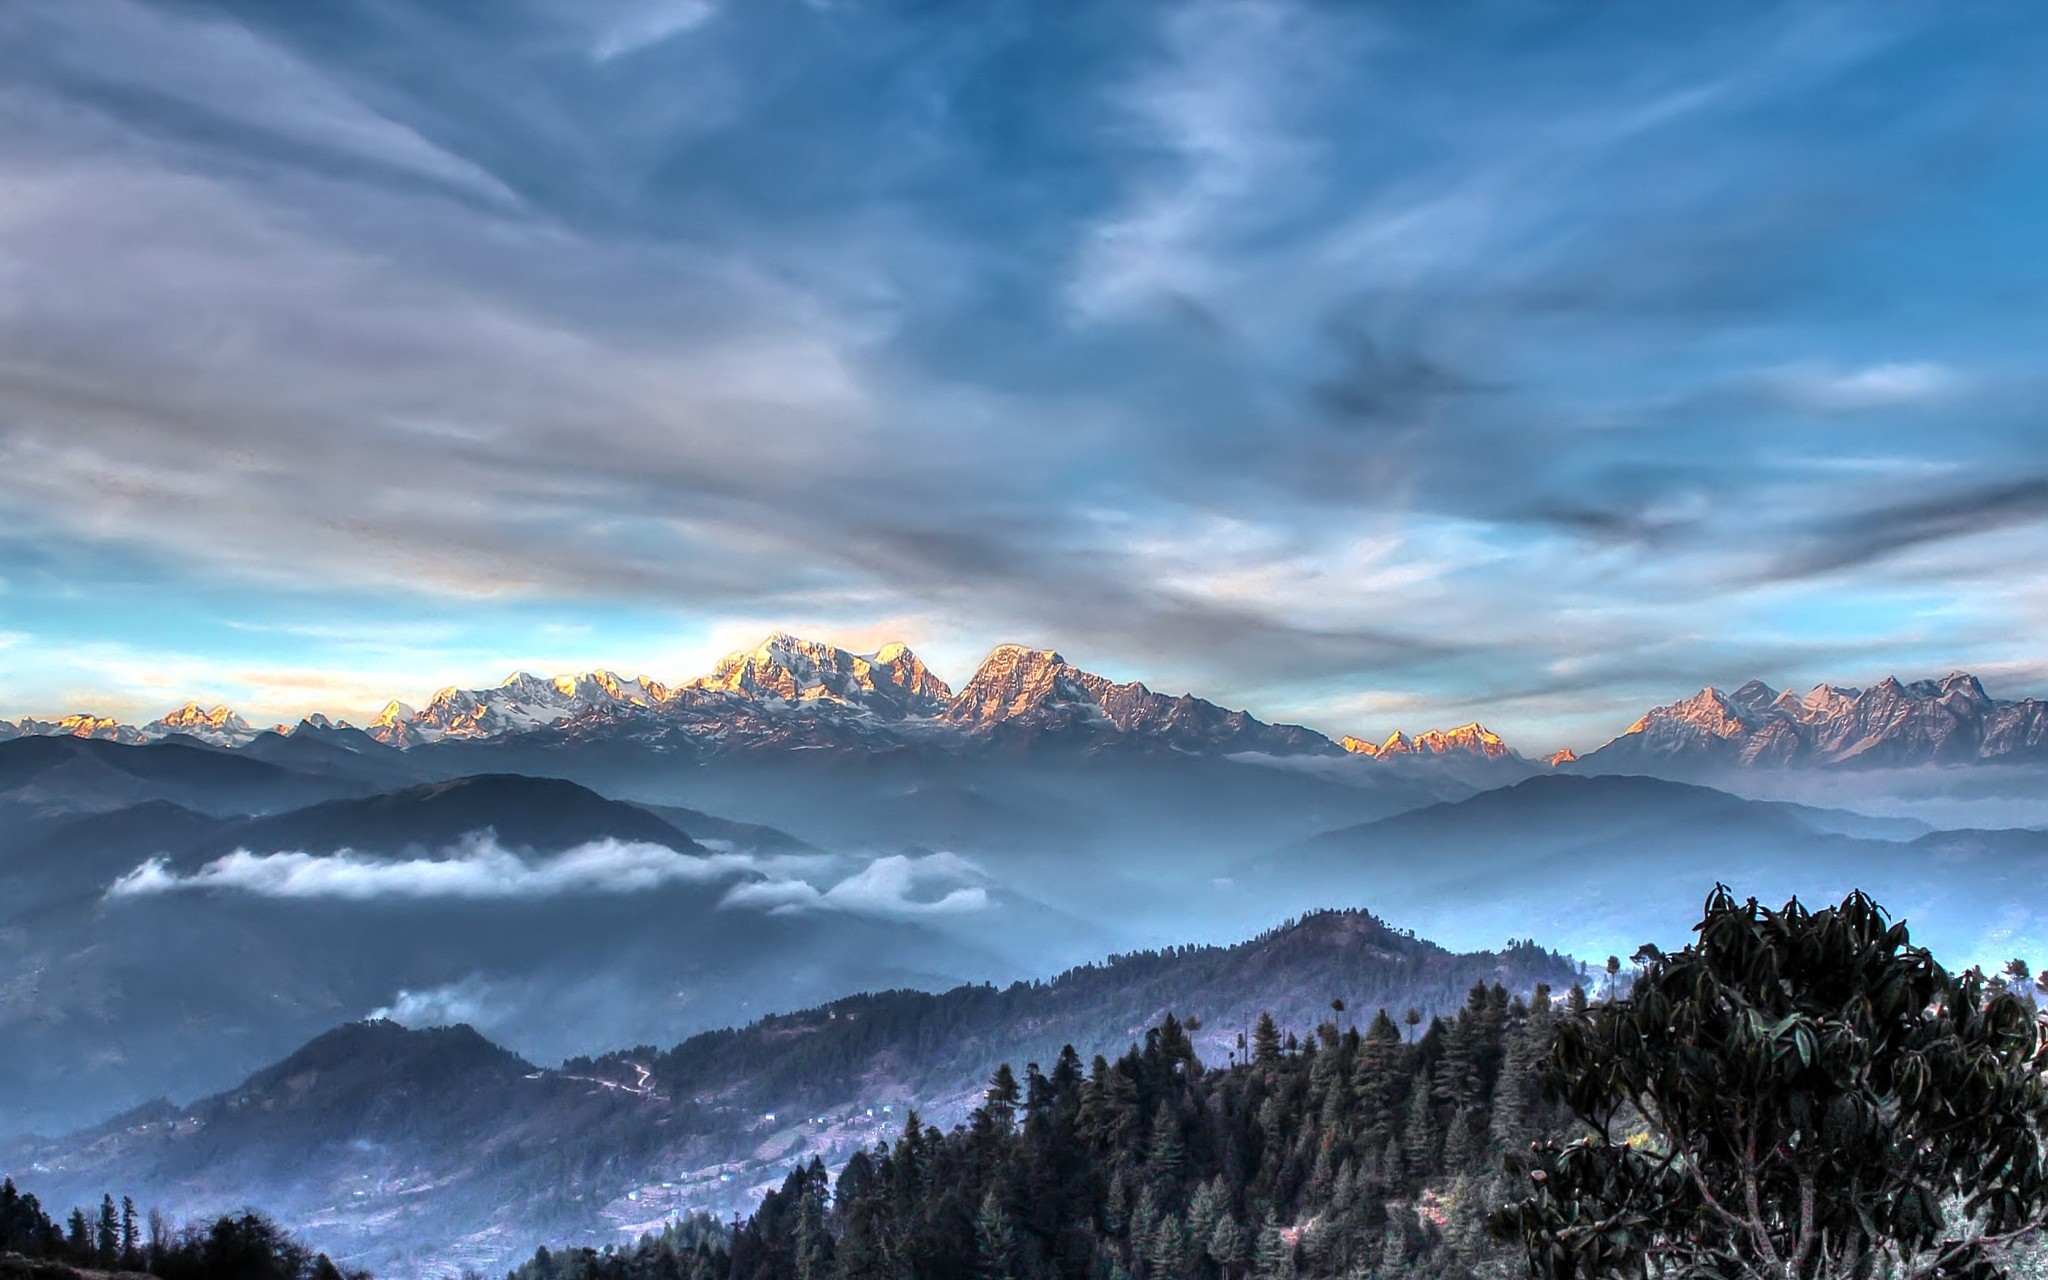 General 2048x1280 landscape nature Himalayas mountains forest snowy peak mist clouds sunset Nepal